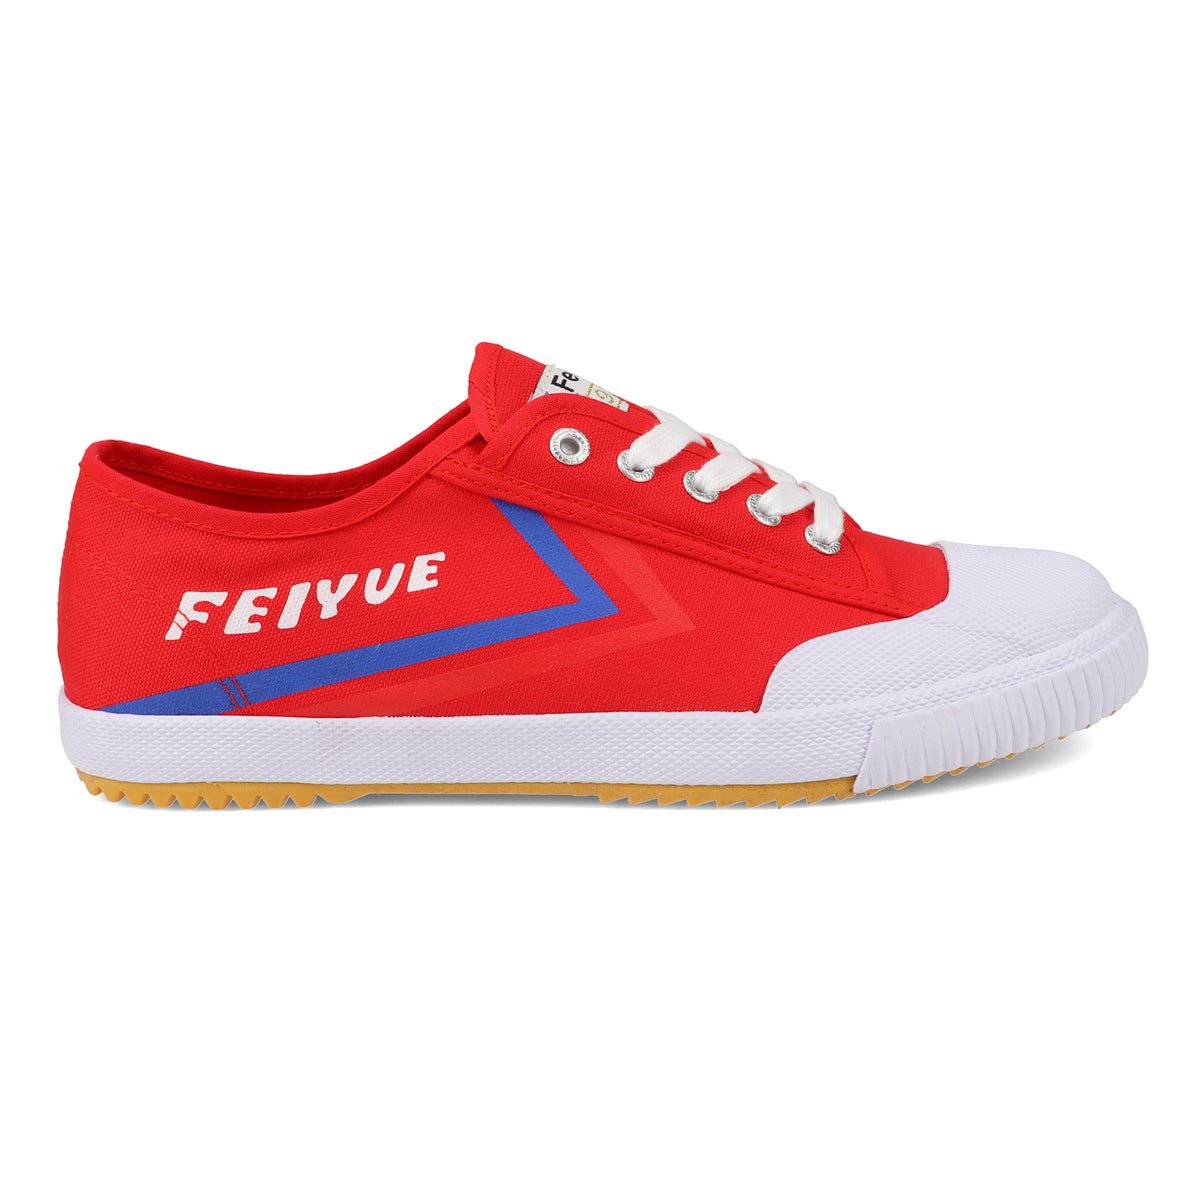 Feiyue FE LO 1920 Review  Best Shoes for Lifting Under $50?